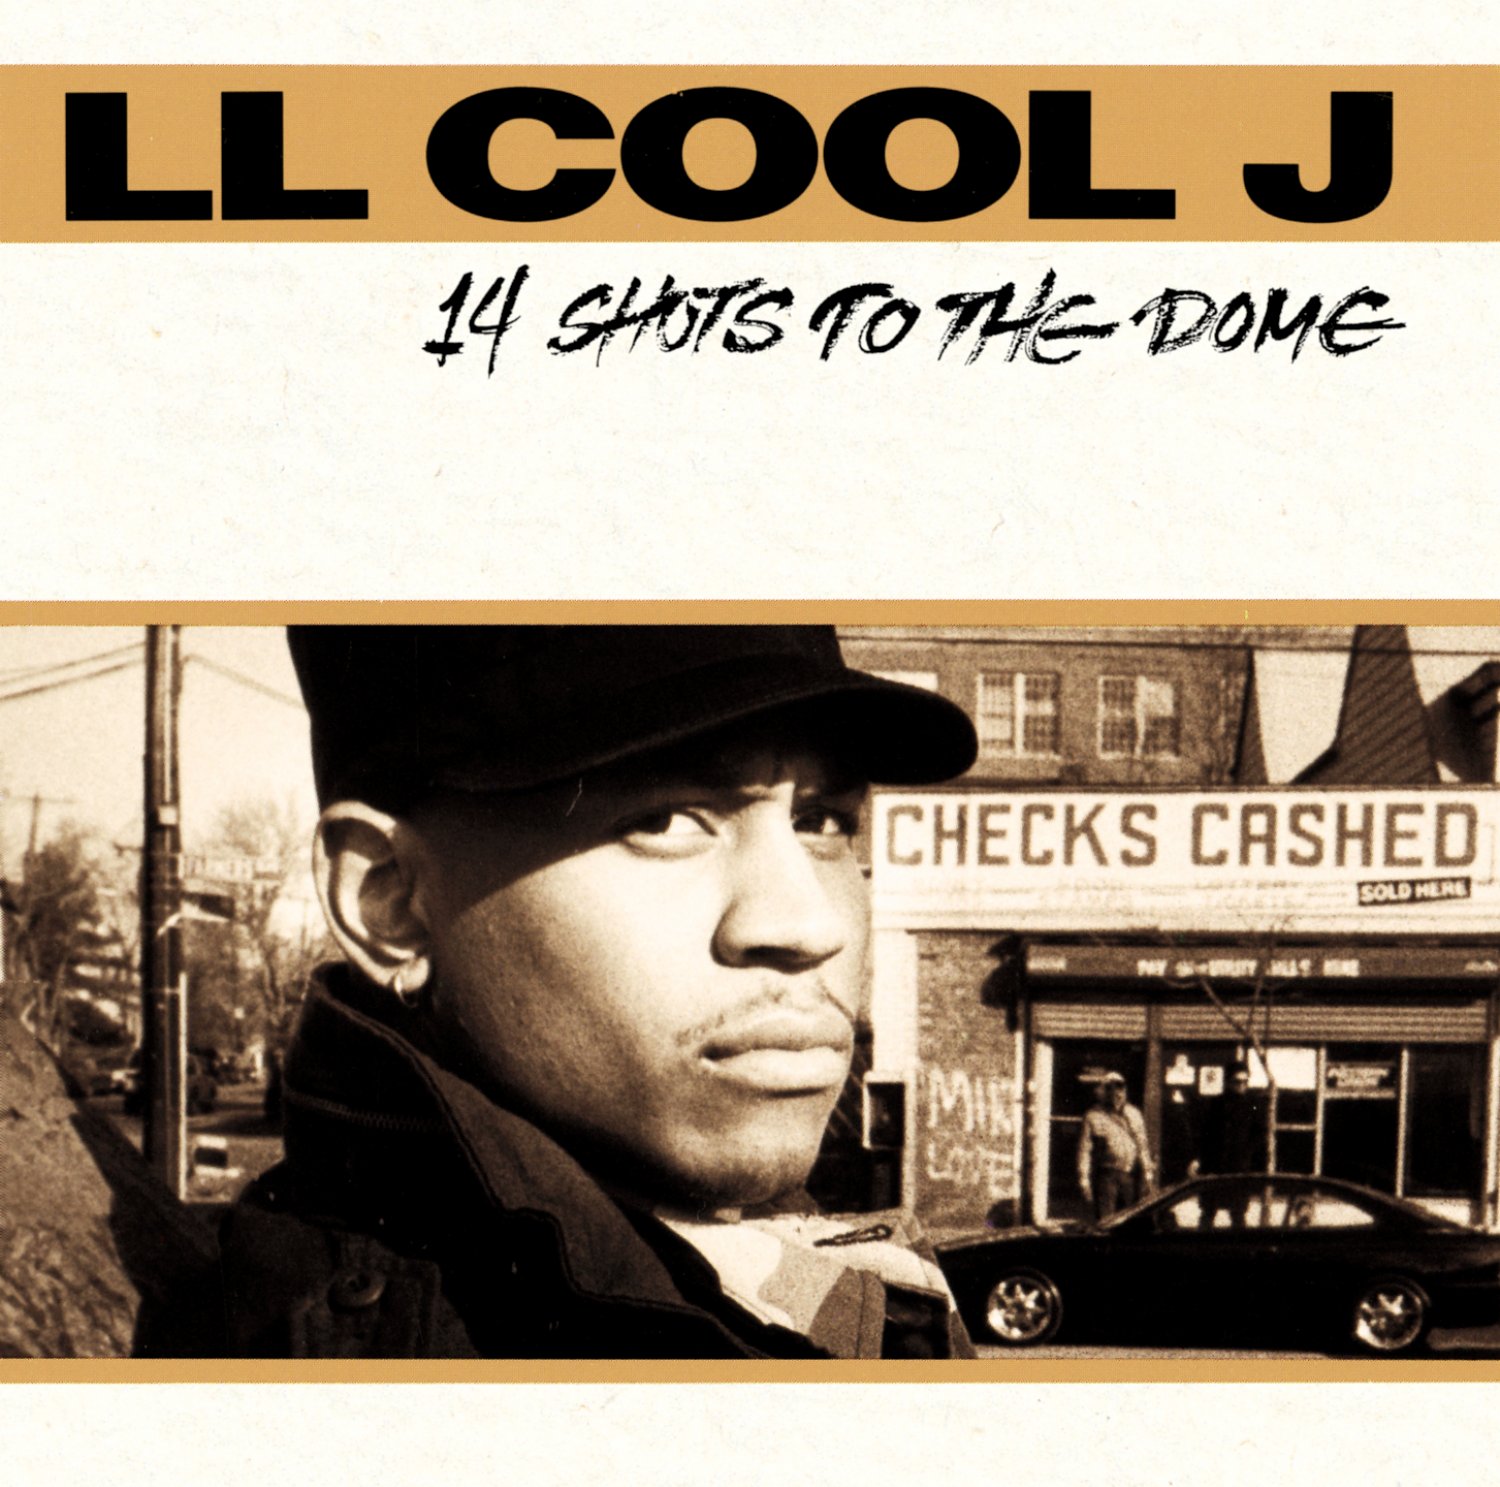 LL Cool J Dropped 14 Shots to the Dome 25 Years Ago